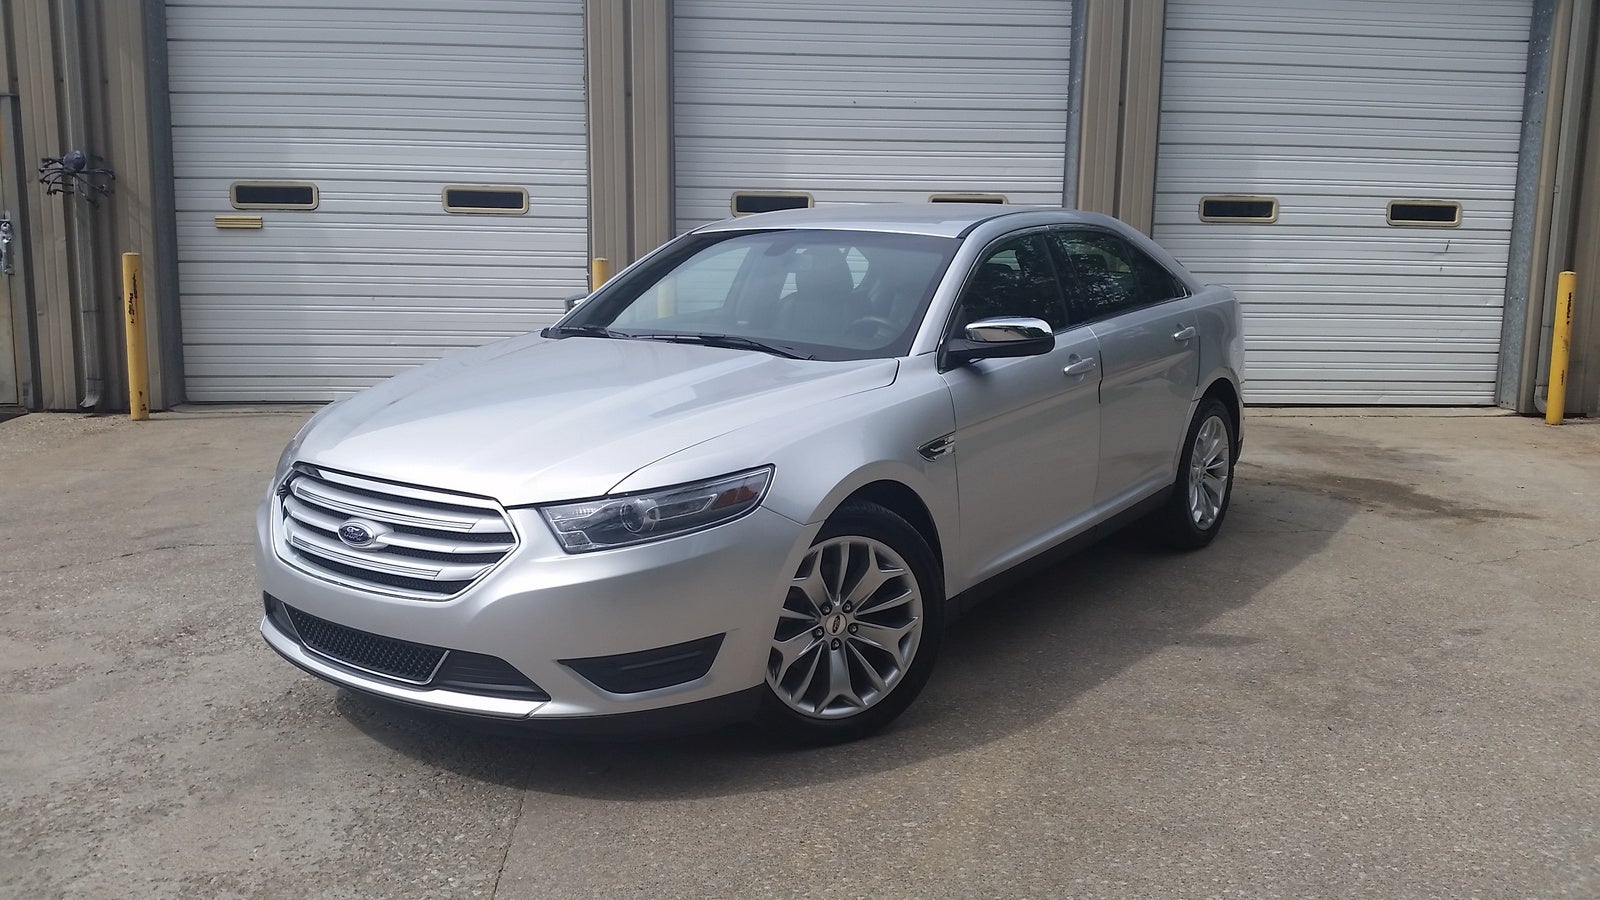 New 2015 Ford Taurus For Sale  CarGurus